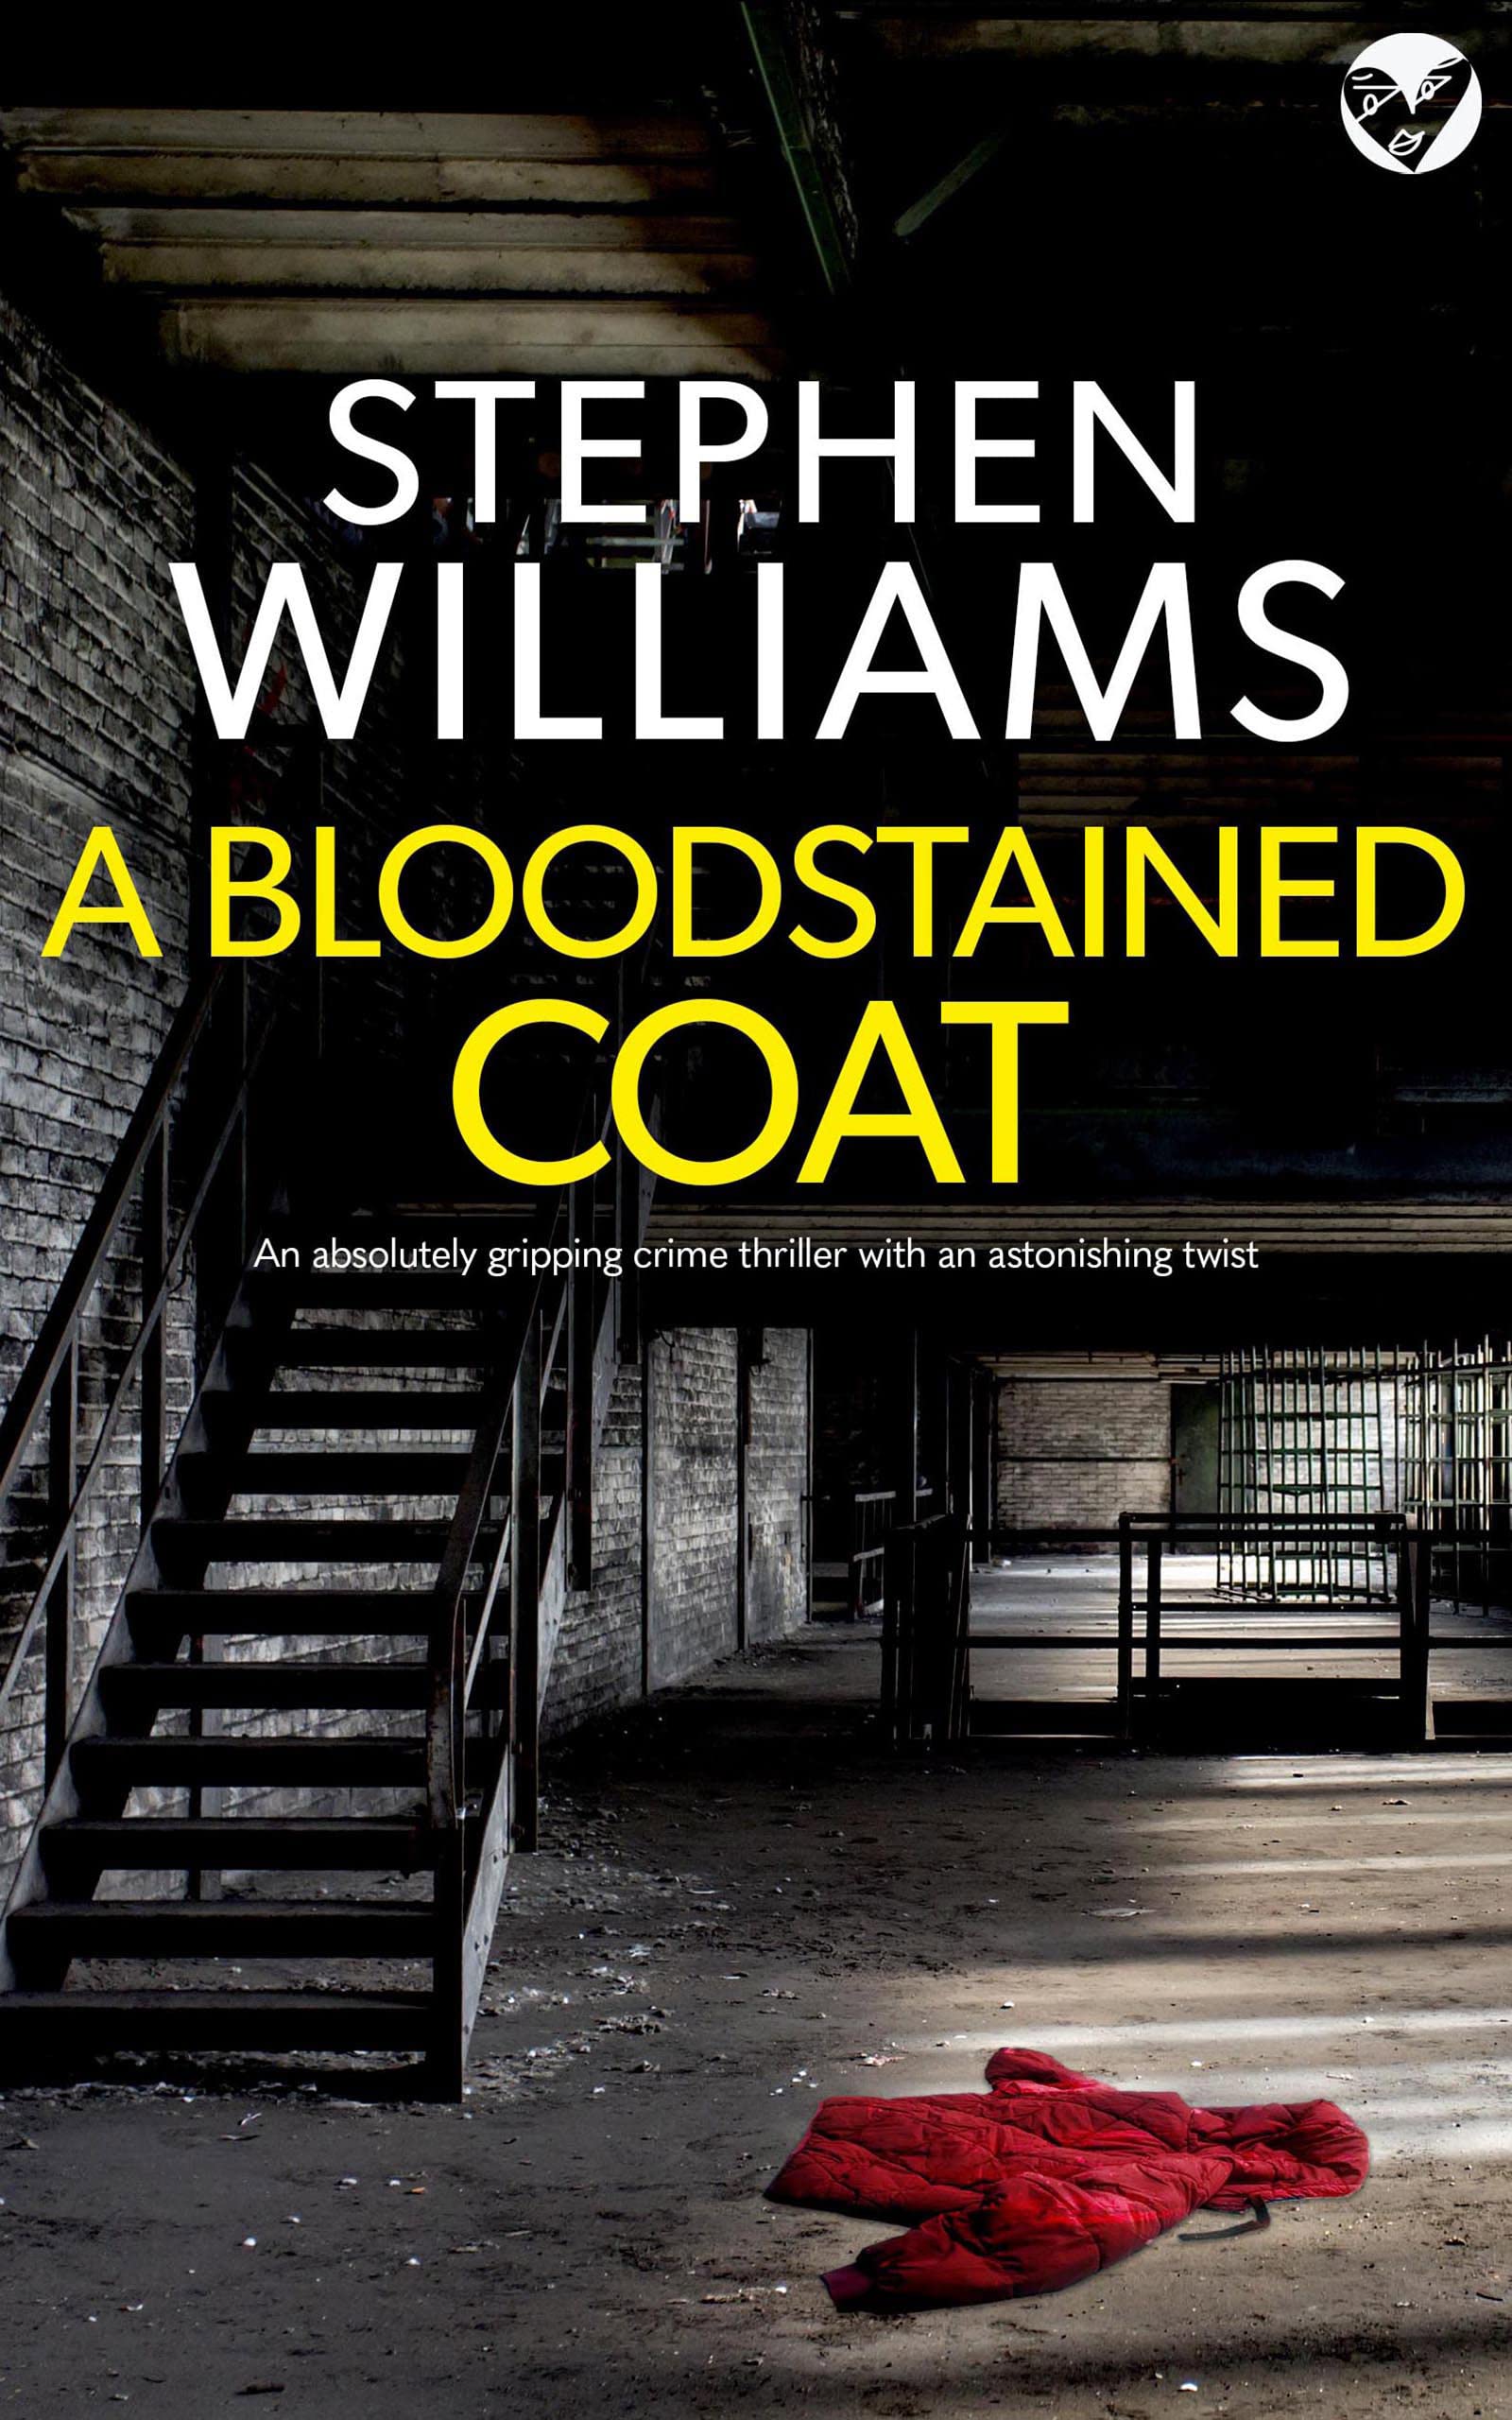 A-BLOODSTAINED-COAT-an-absolutely-gripping-crime-thriller-with-an-astonishing-twist-by-Stephen-Williams-PDF-EPUB